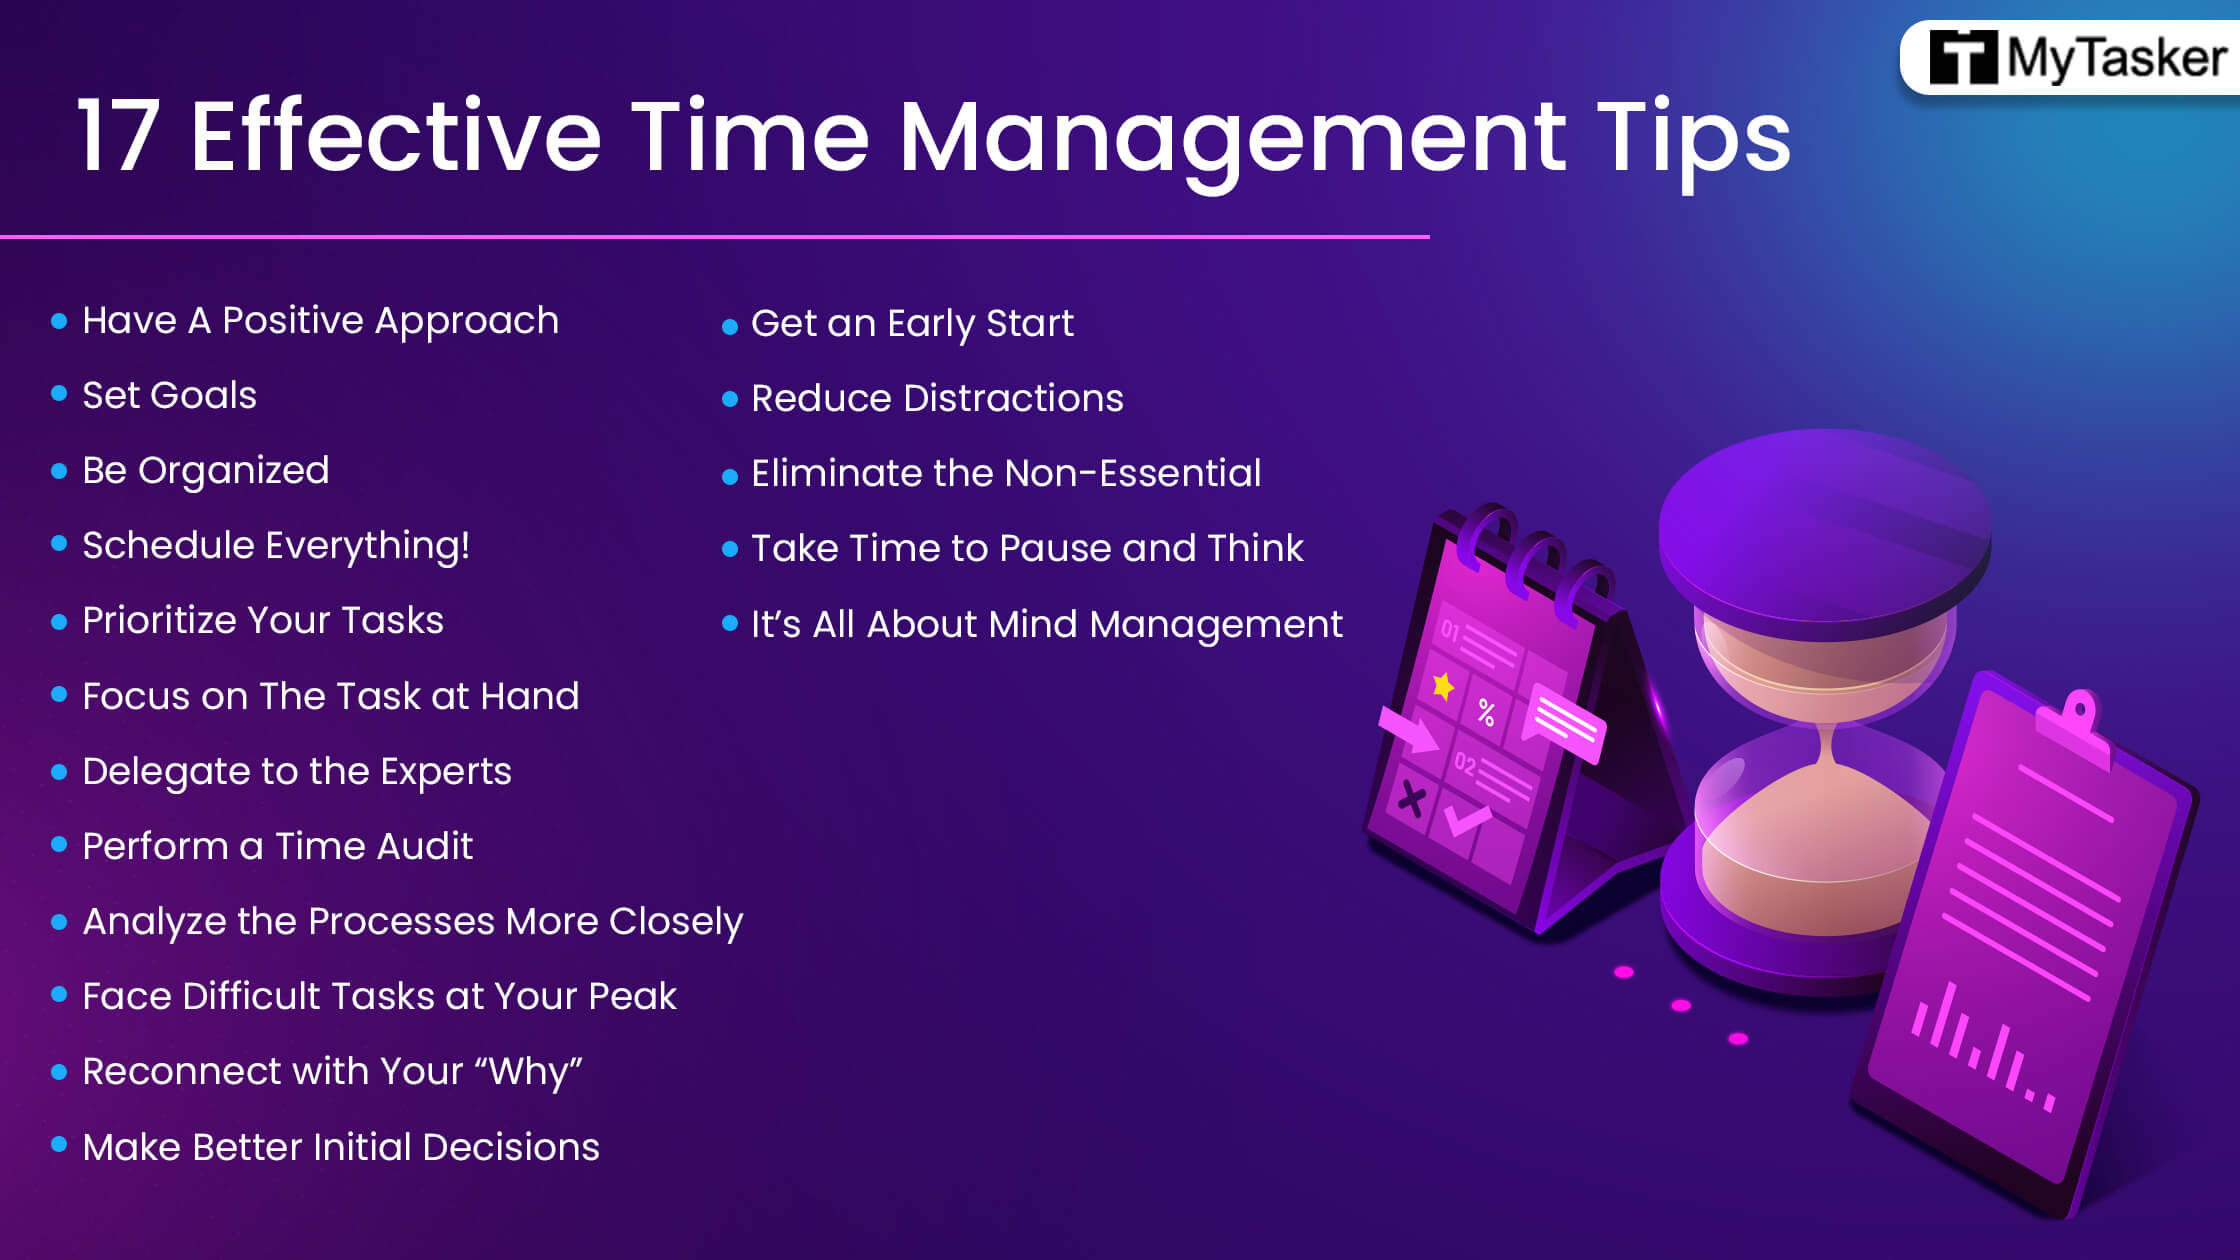 17 Effective Time Management Tips for Busy Entrepreneurs [Infographic]